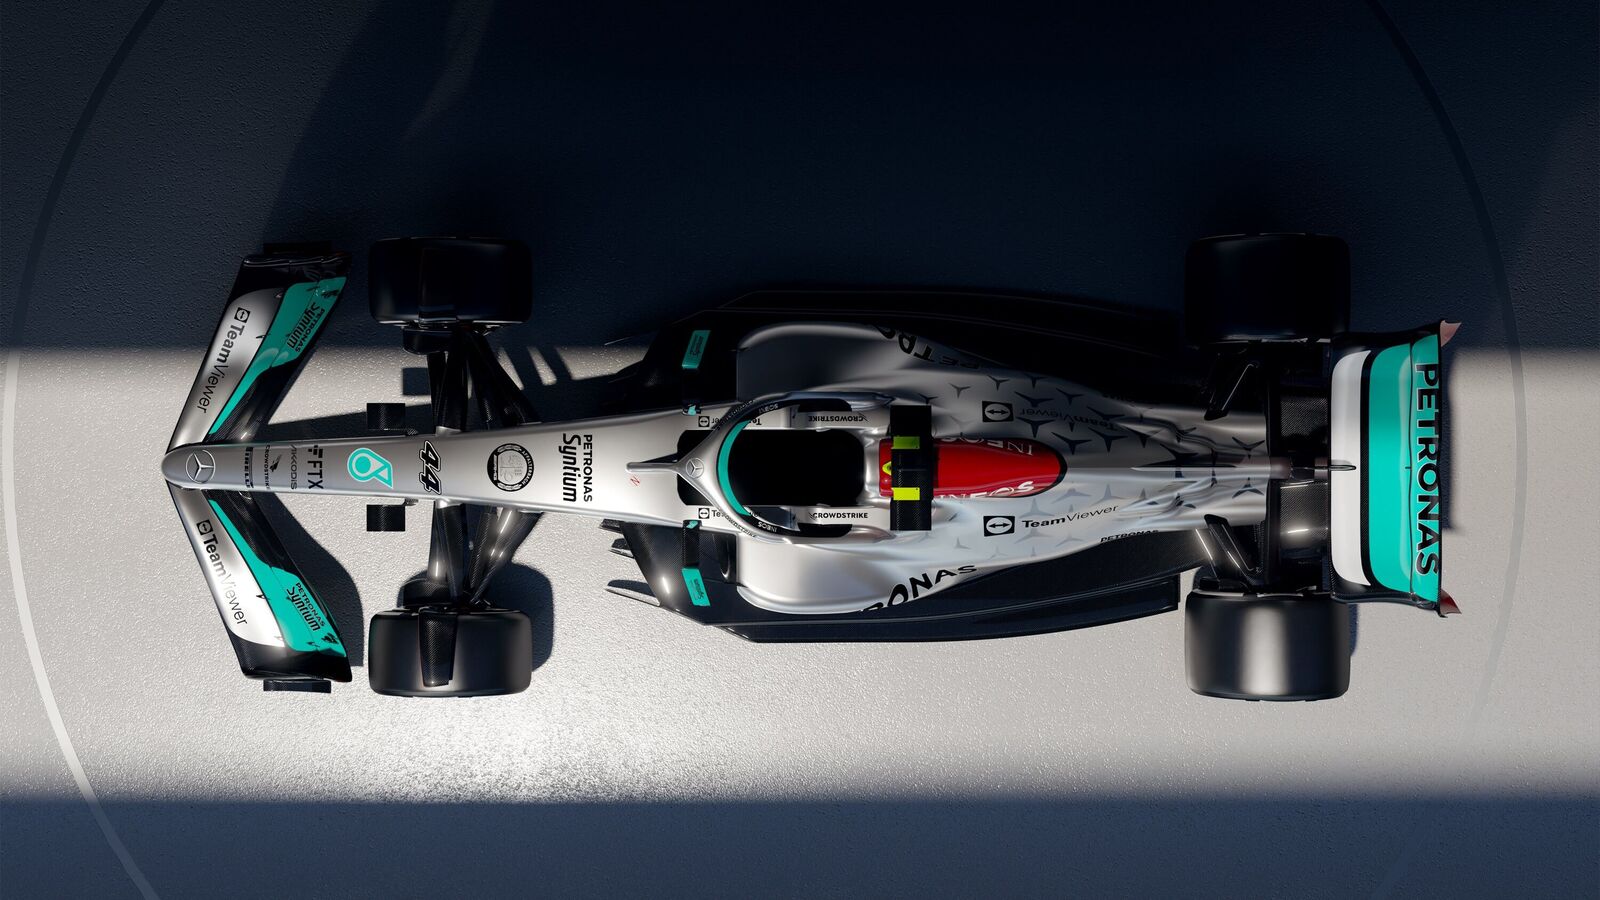 Mercedes's Formula 1 car for 2022 revealed, Lewis Hamilton's bet for 9th crown